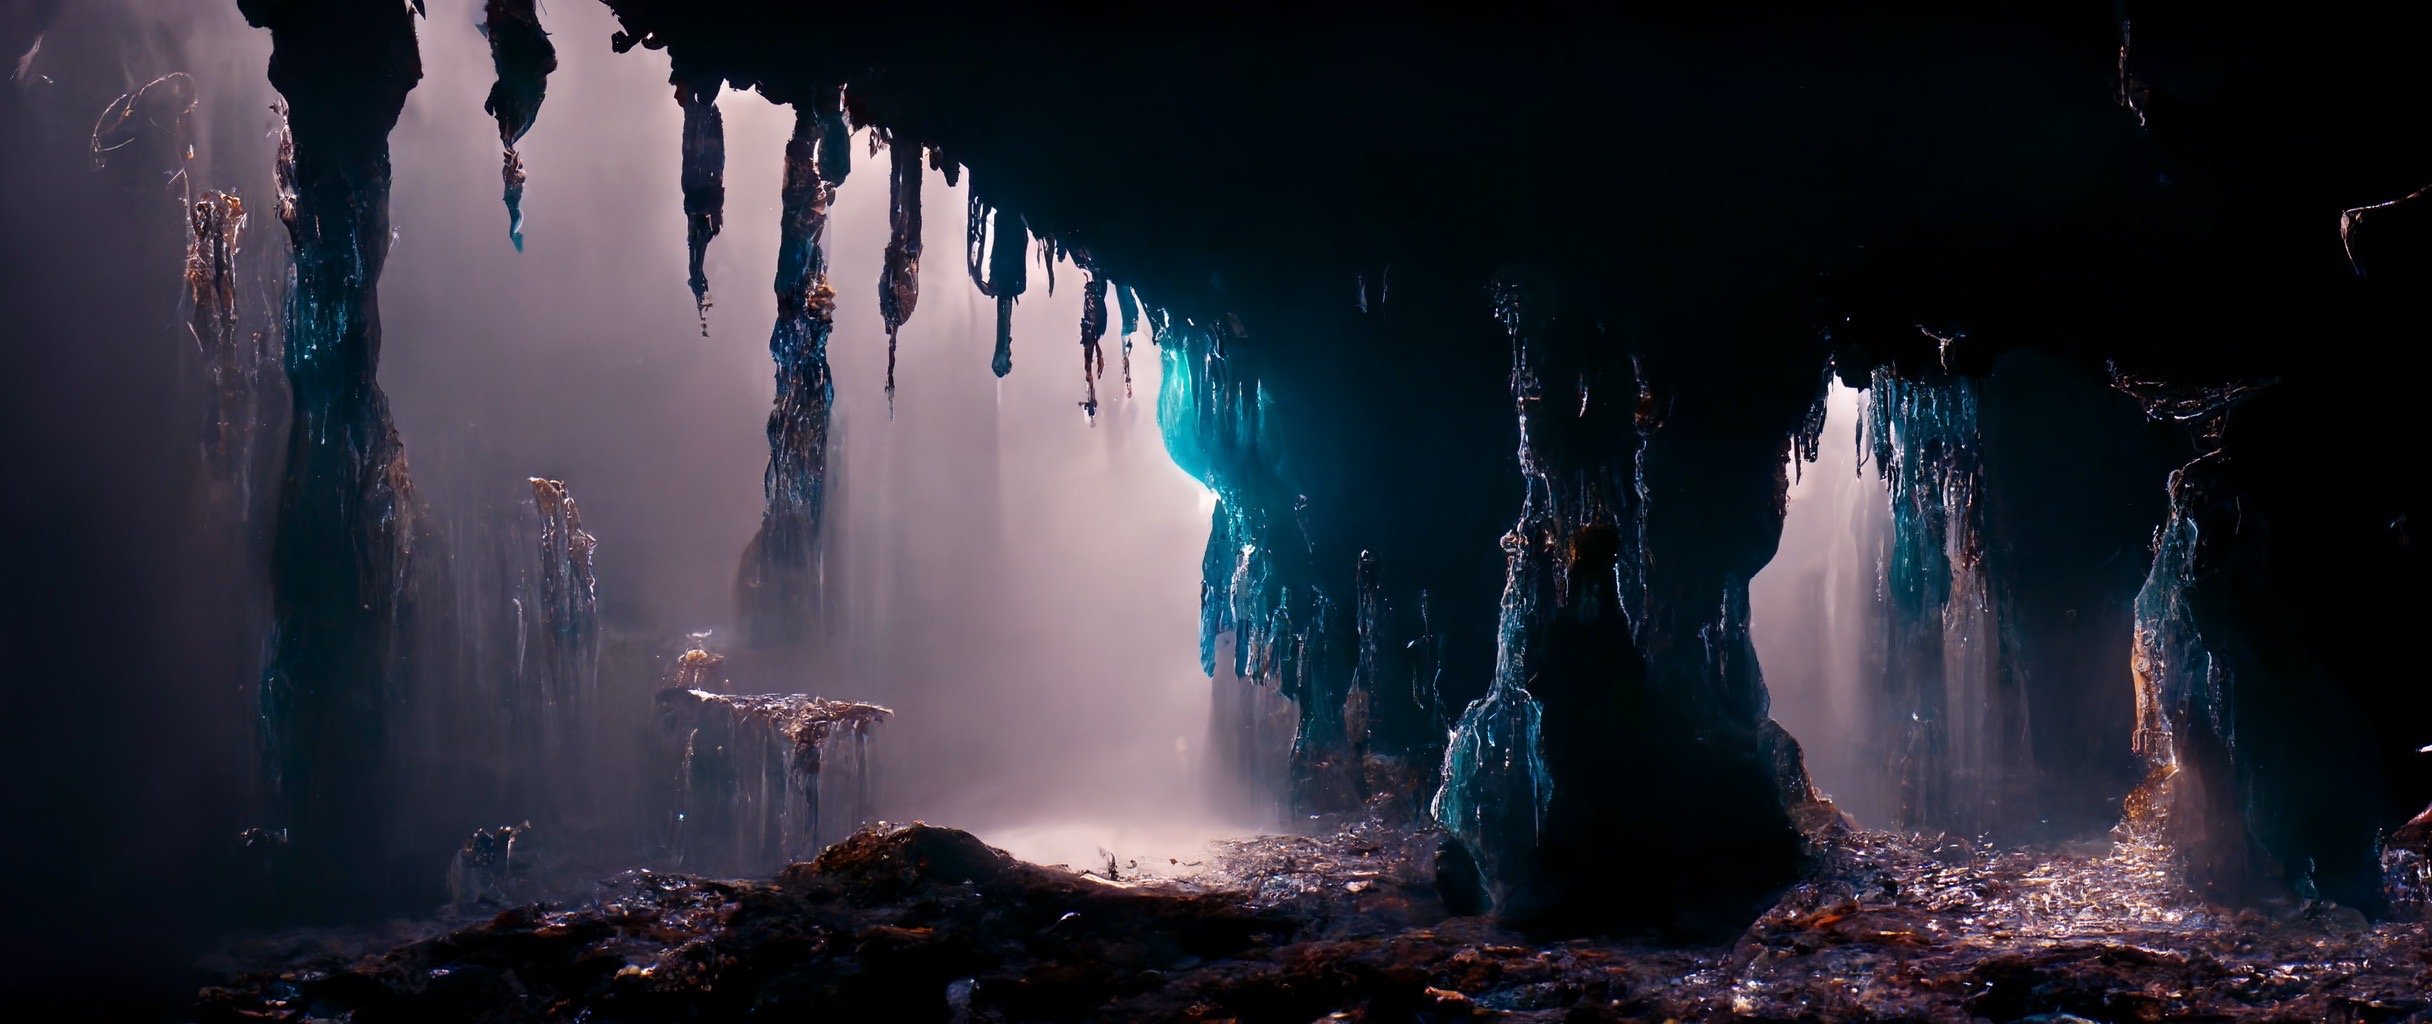 dc12c5cb-6083-4606-8b59-1b28c184156e_S3RAPH_incredible_mystical_cave_filled_with_sapphires._Stalactites_and_stalagmites_dripping_with_liquid._ci.JPG